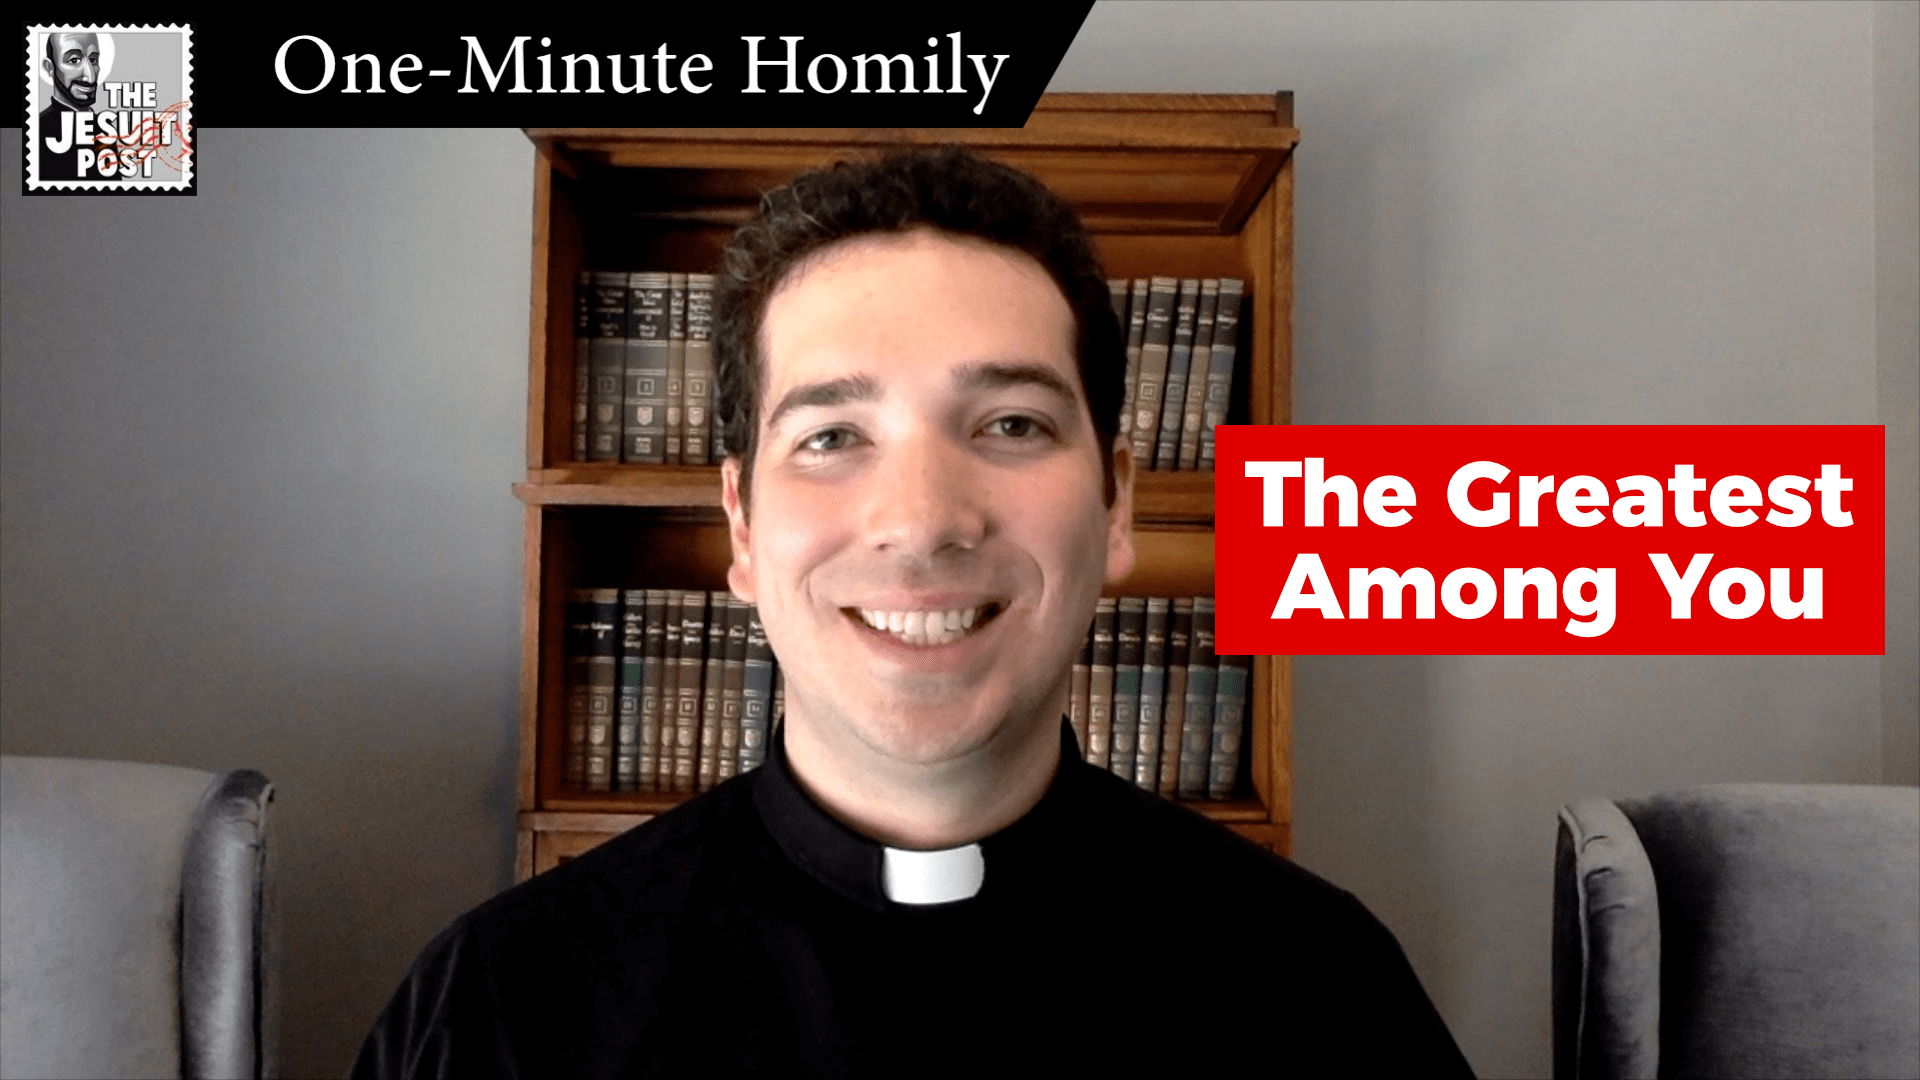 One-Minute Homily: “The Greatest Among You”